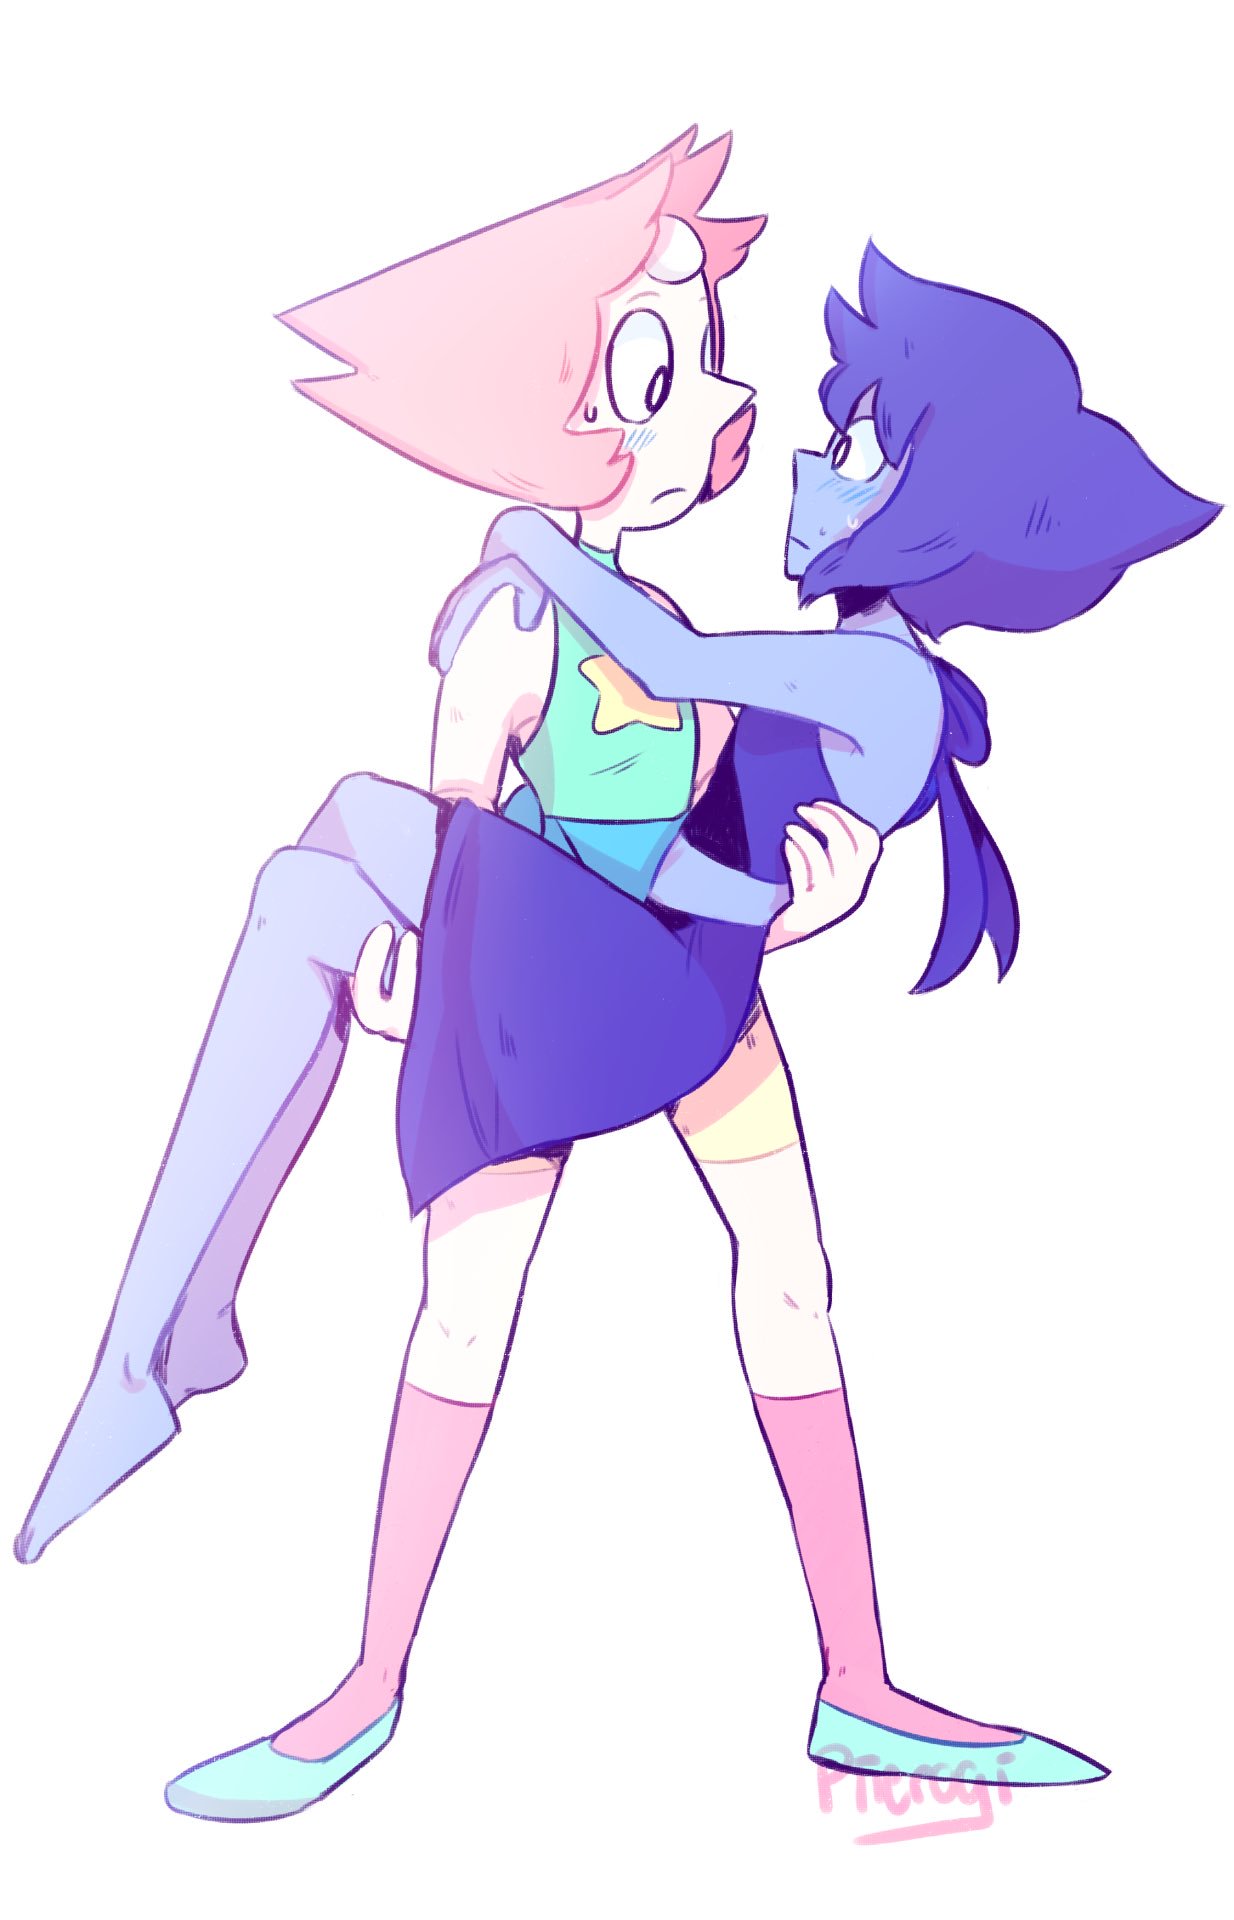 “Hi I drew pearlapis @jellie_bee  also doing a speed paint of it, look forward to it!~”